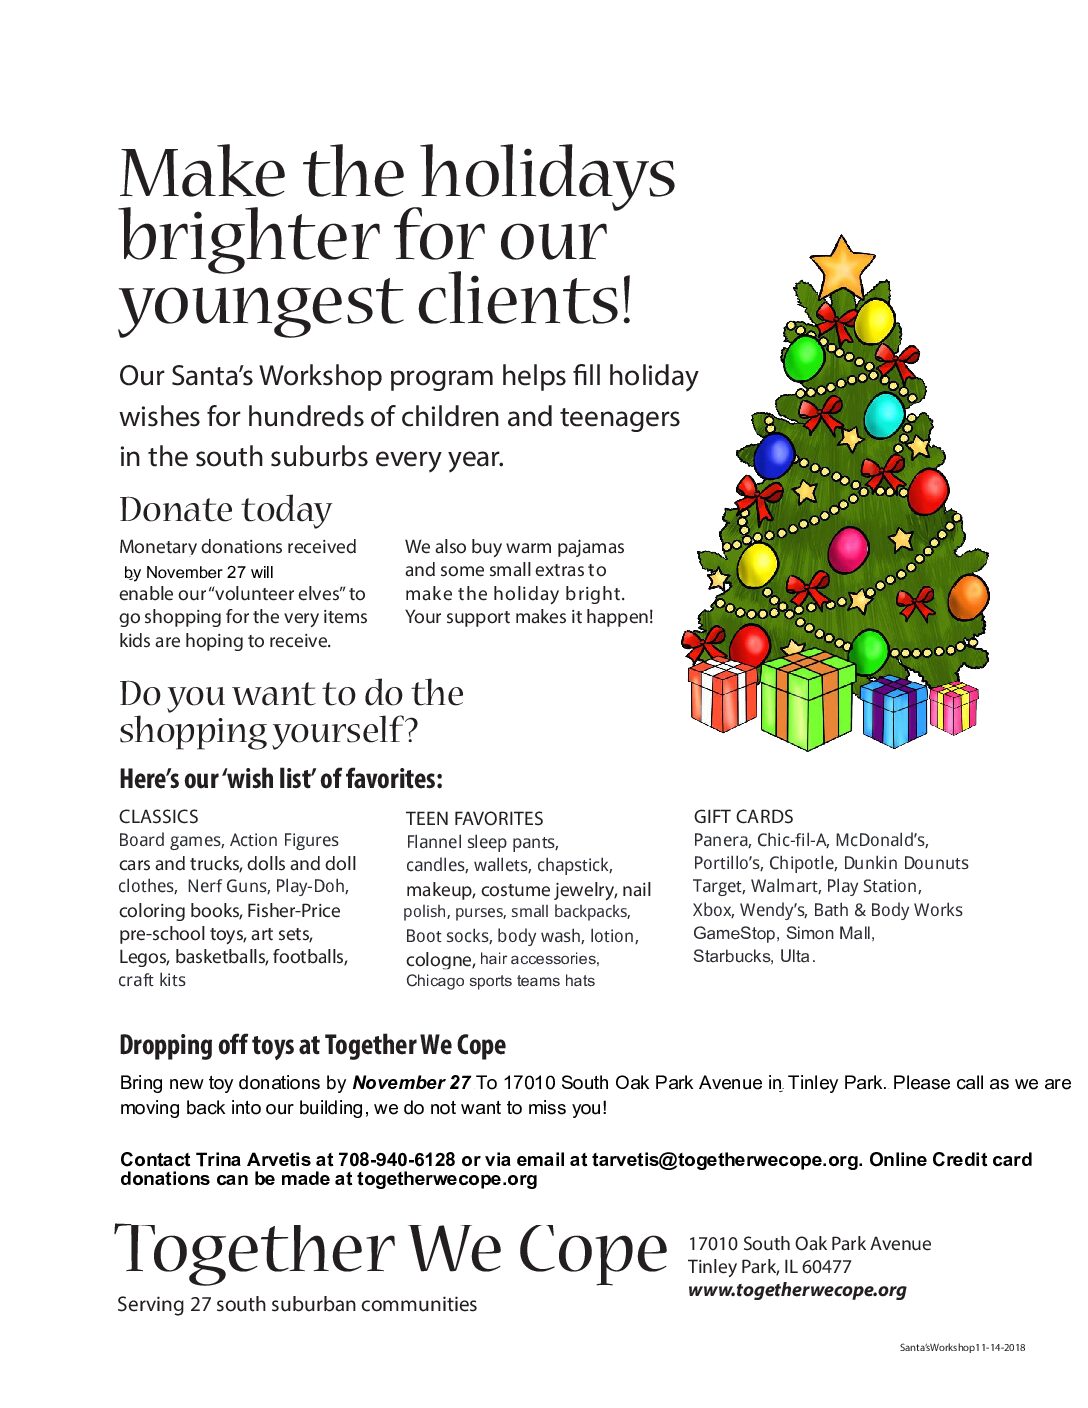 Make the holidays brighter for our youngest clients!